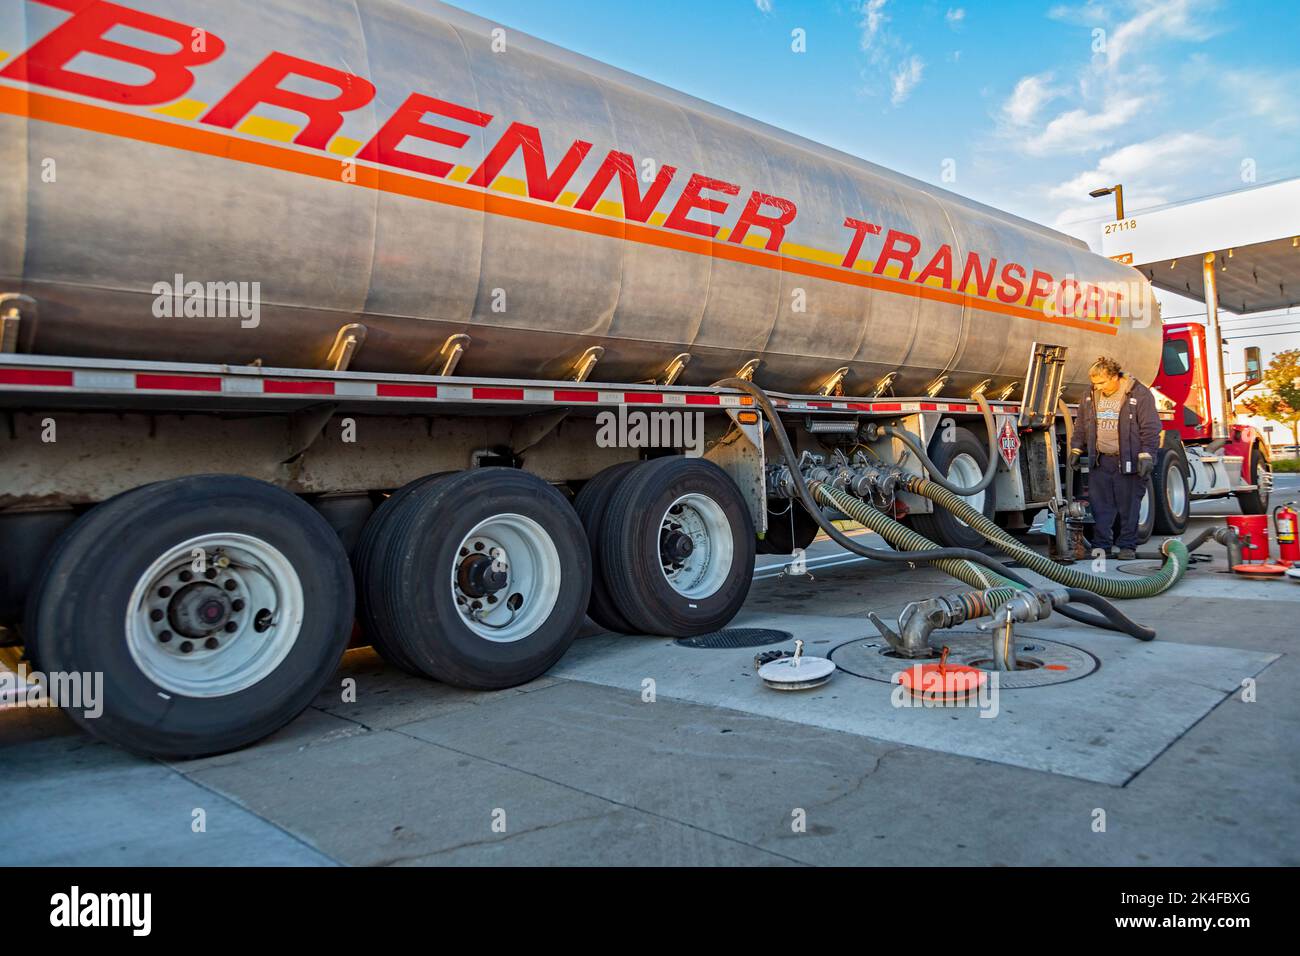 Roseville, Michigan - A tanker truck delivers gasoline to a Costco gas station. Stock Photo